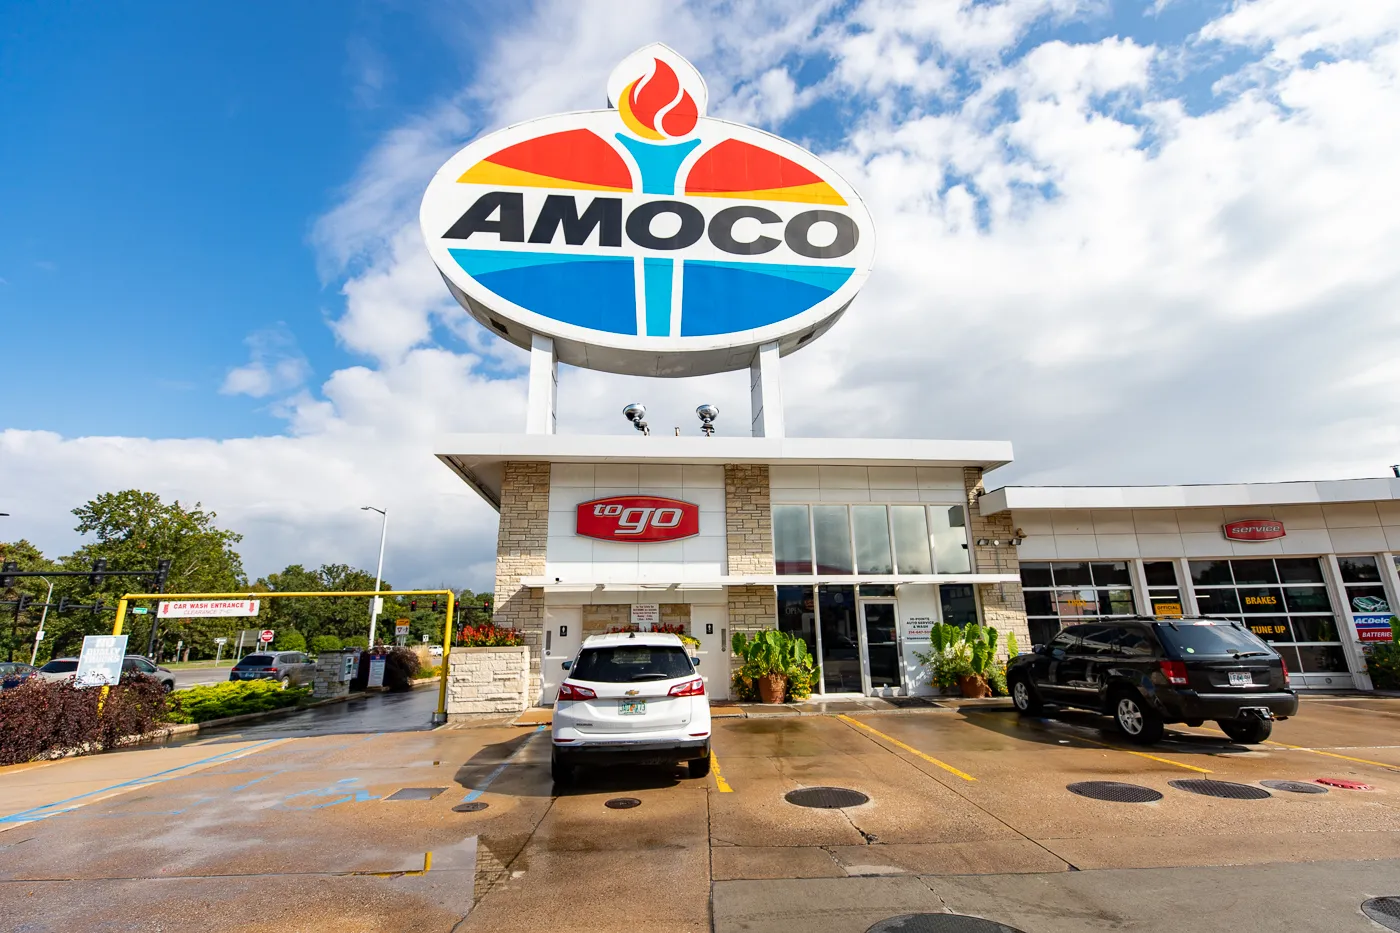 World's Largest Amoco Sign in St. Louis, Missouri